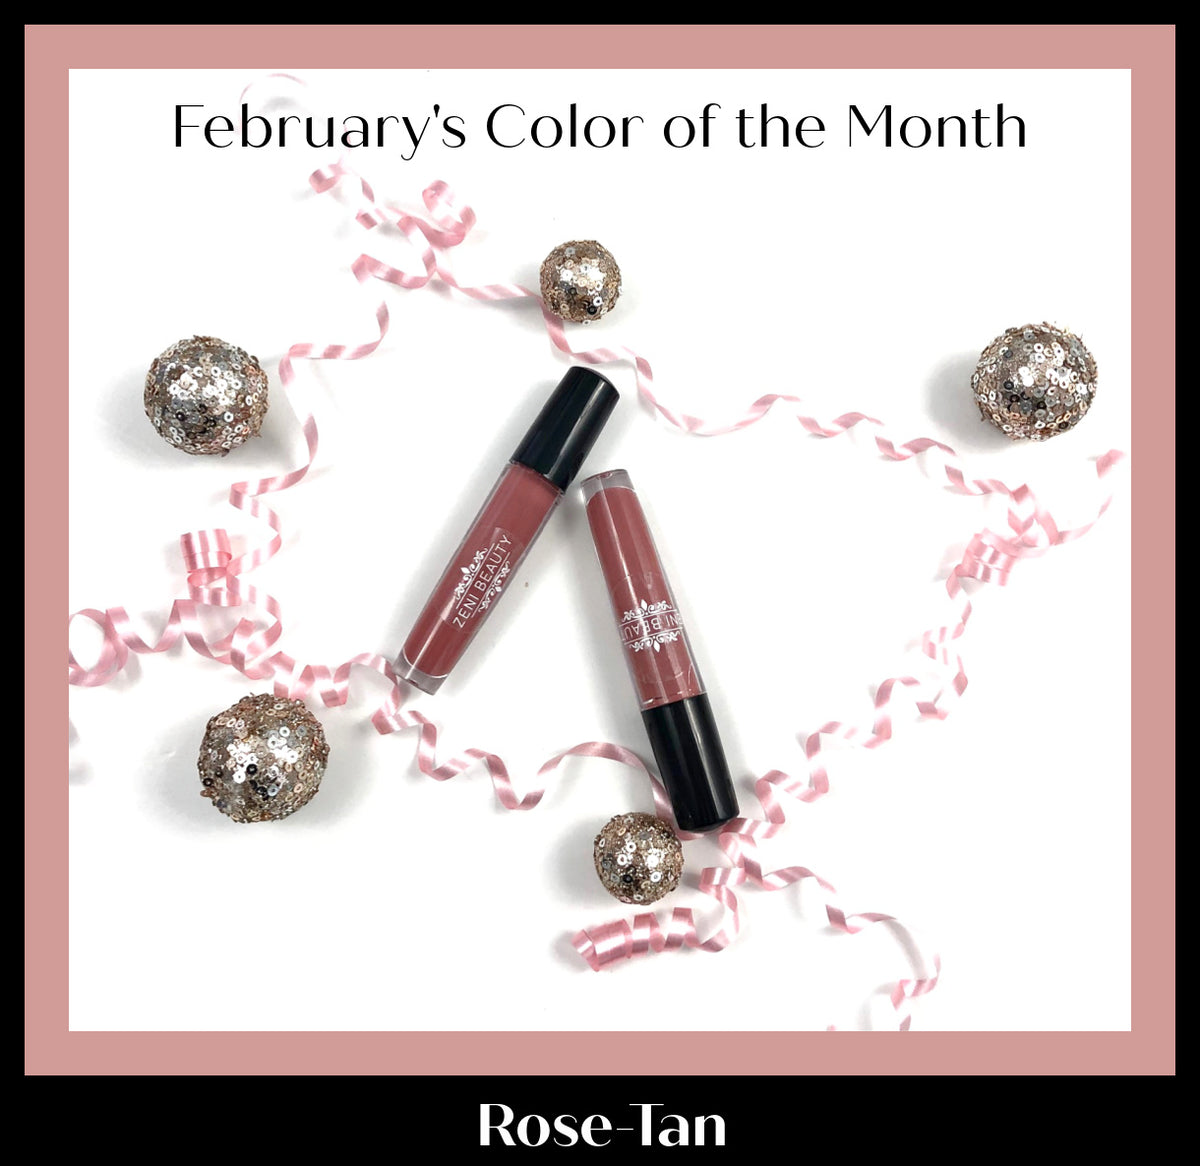 February's Color of the Month is Rose-Tan